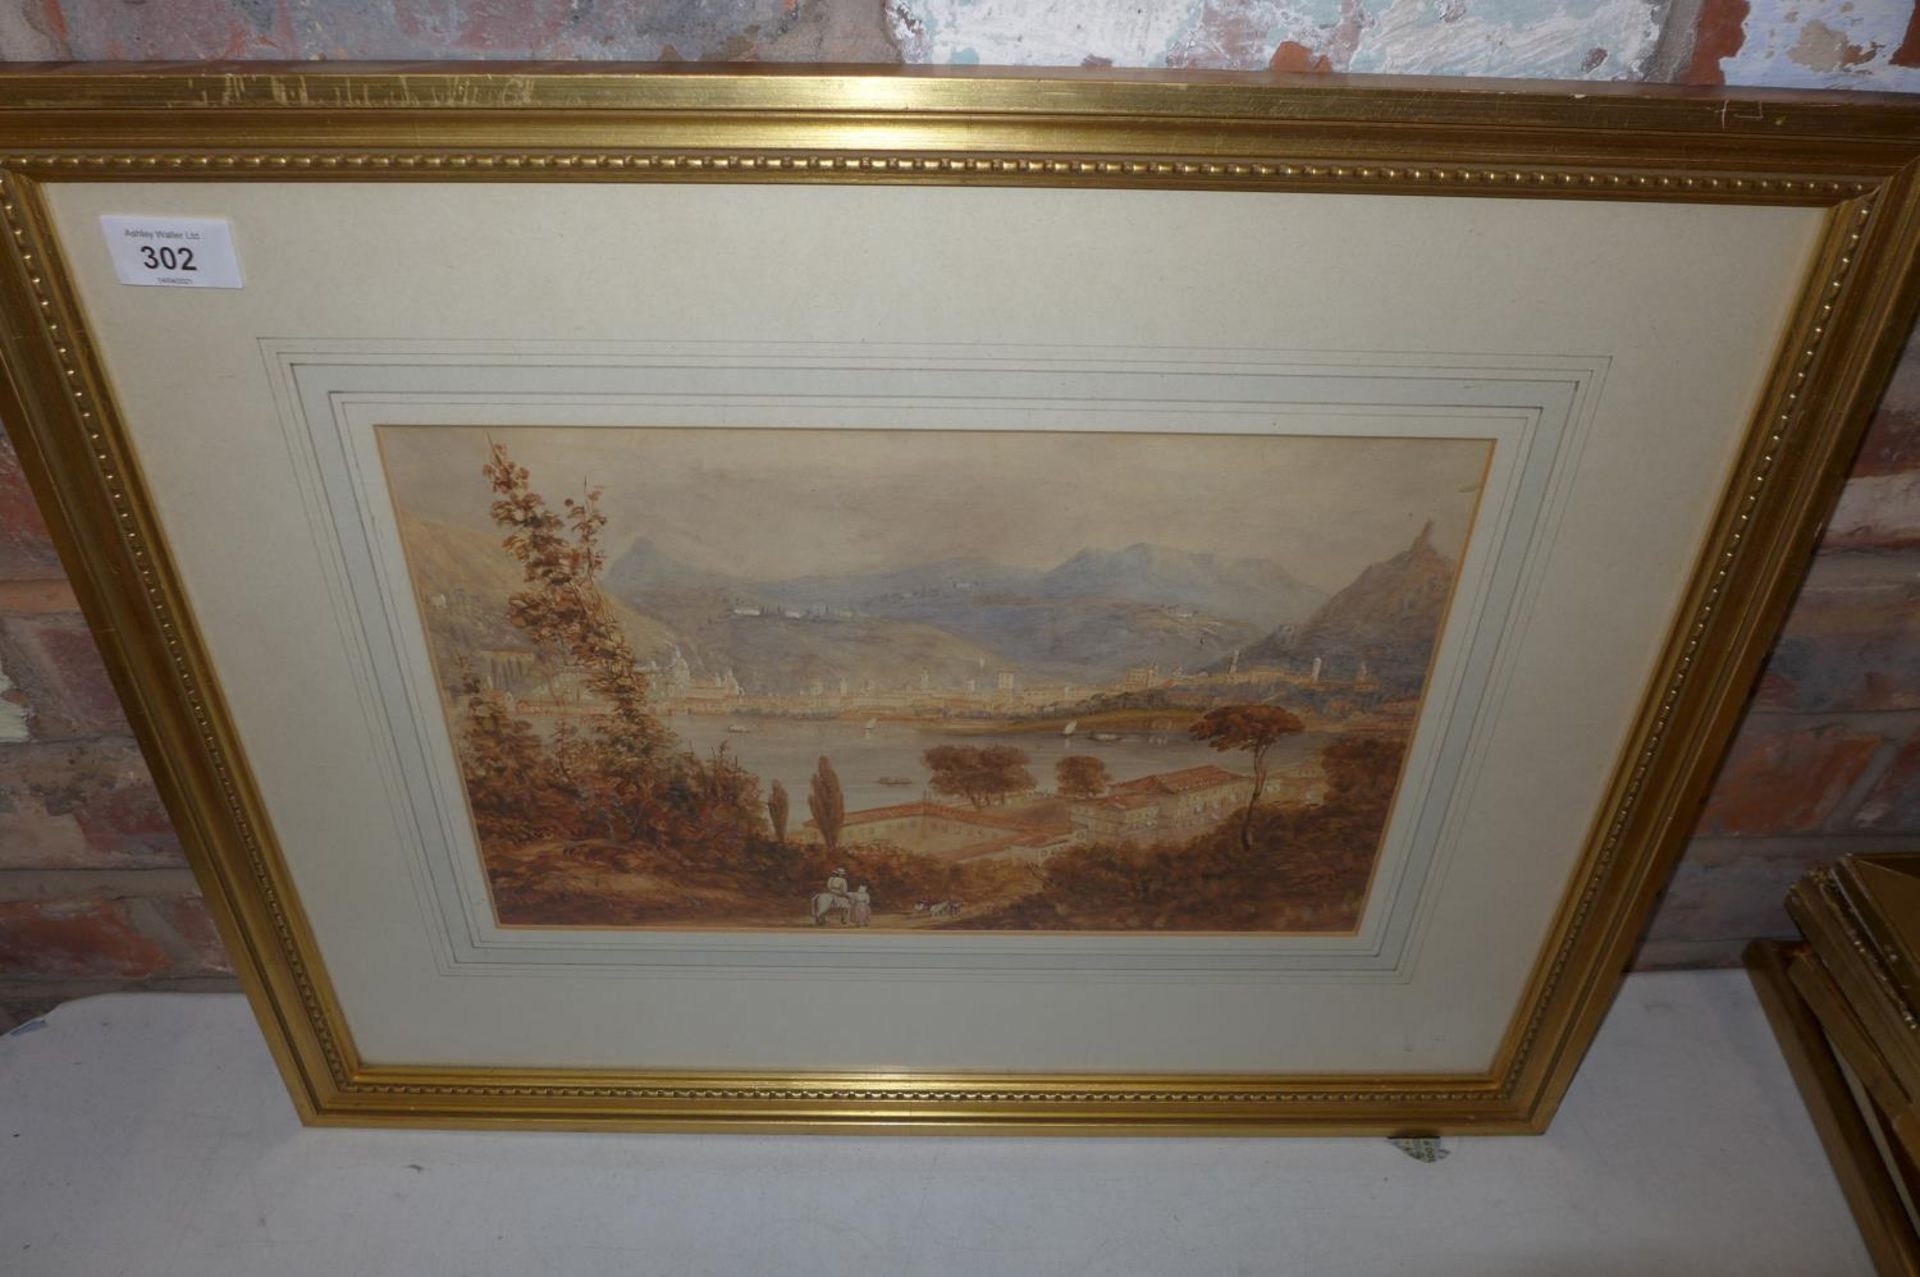 A LATE 19TH/EARLY 20TH CENTURY WATERCOLOUR OF A CONTINENTAL LAKE SCENE, 23X36CM